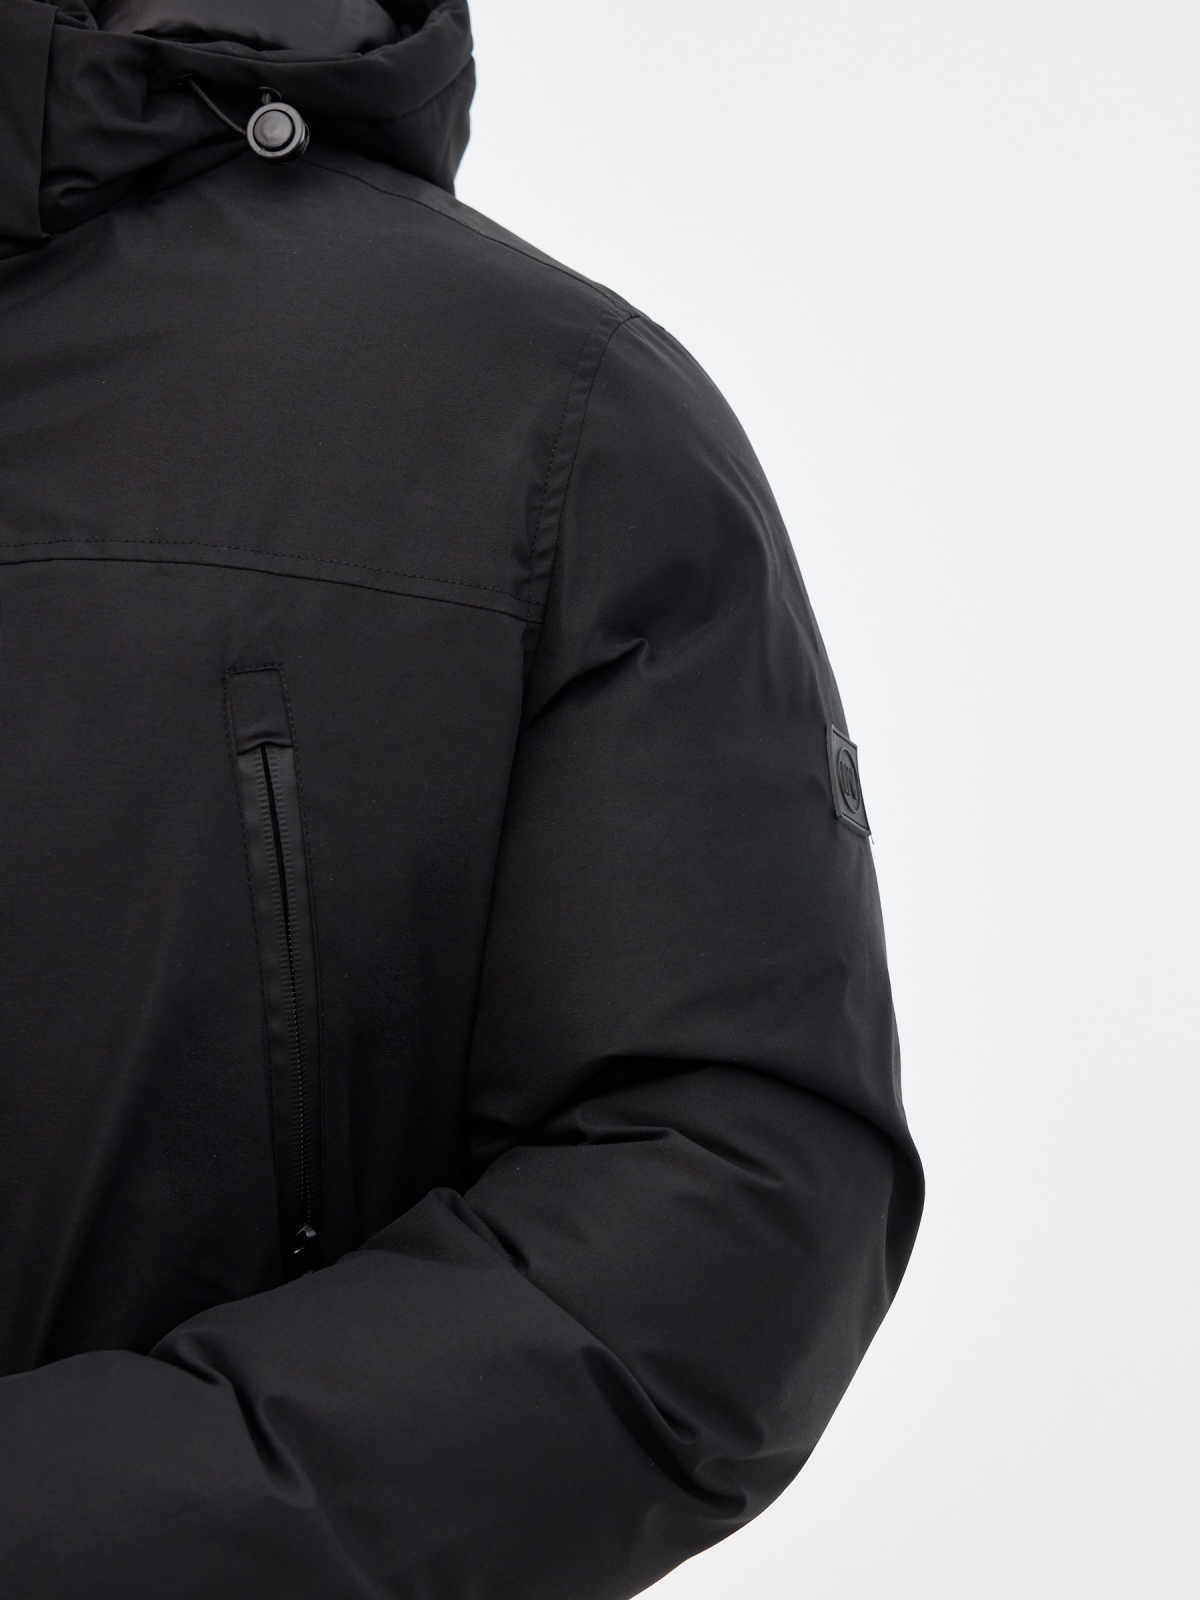 Hooded parka black detail view